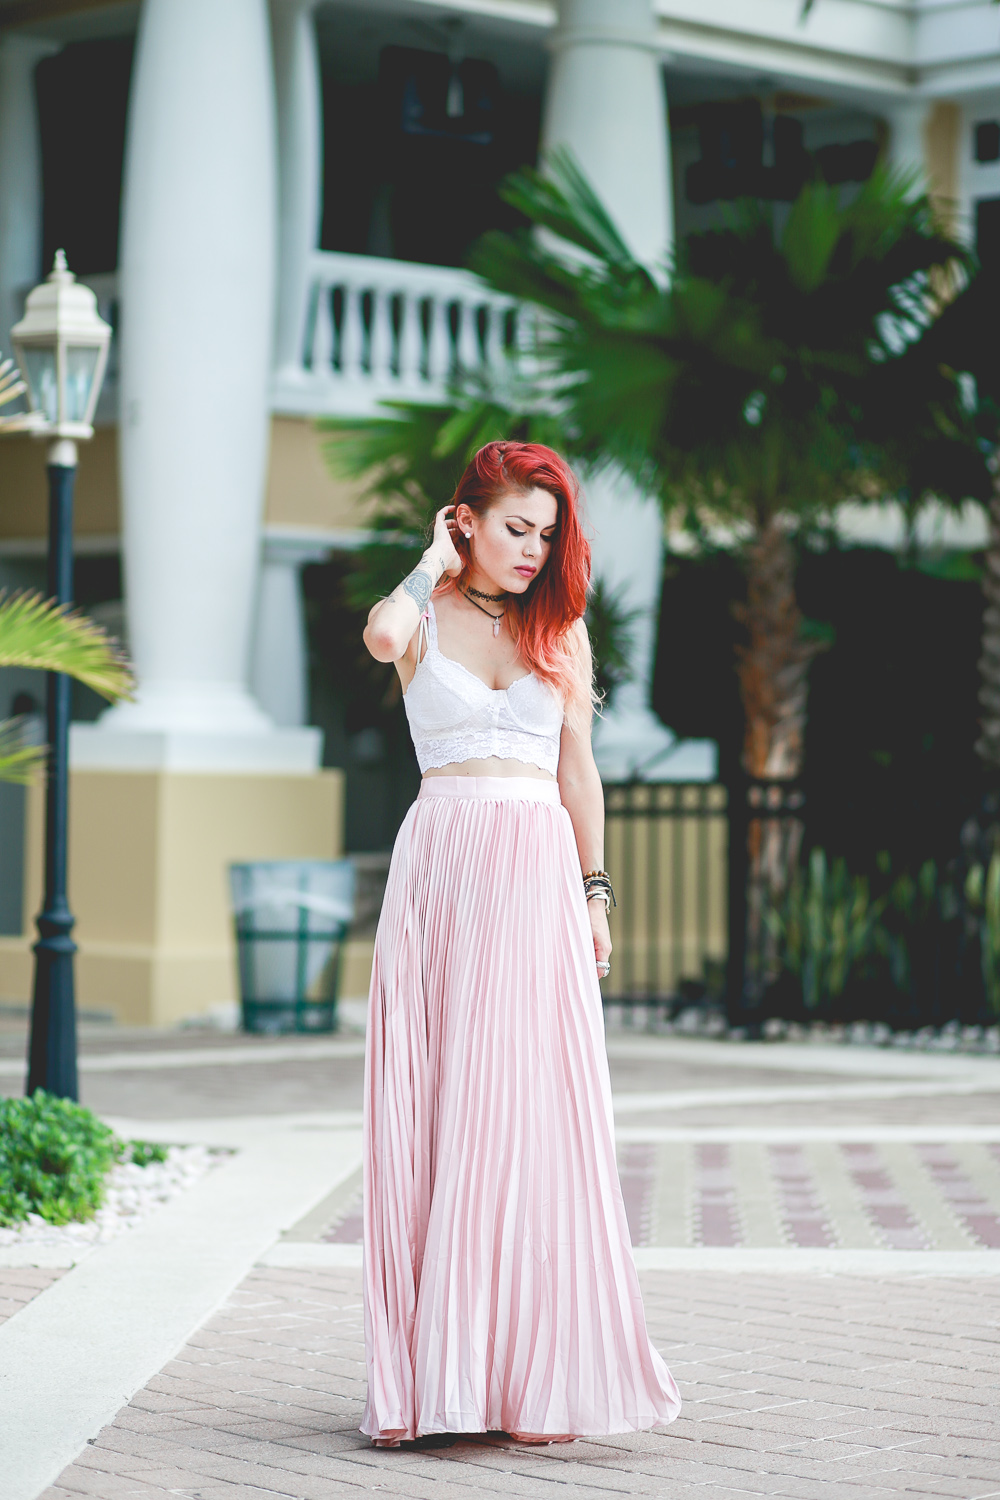 Le Happy wearing pastel pleated skirt and lace bustier in summer